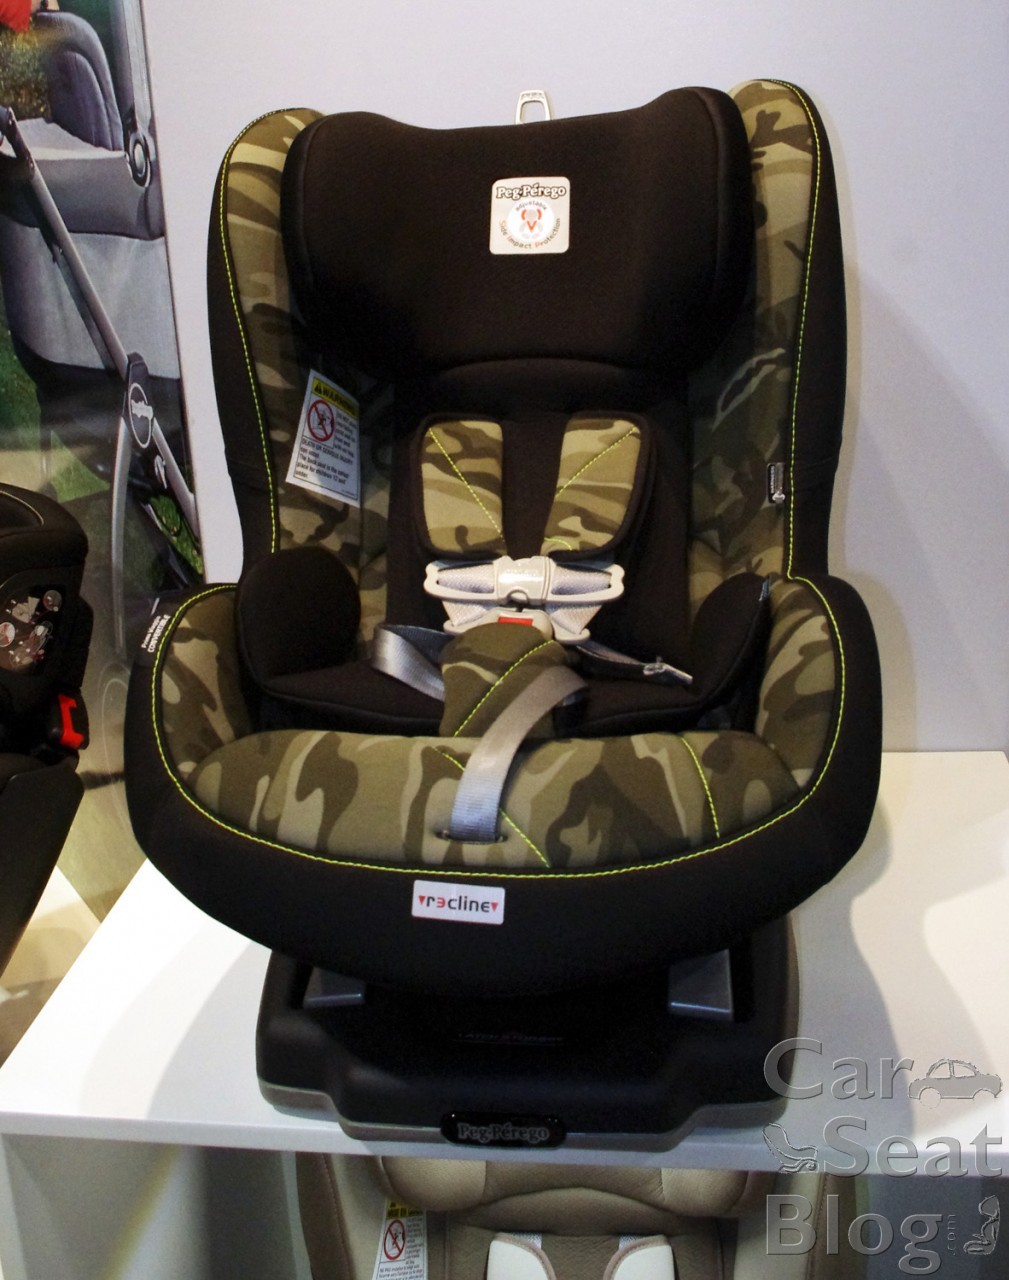 camo stroller and carseat combo